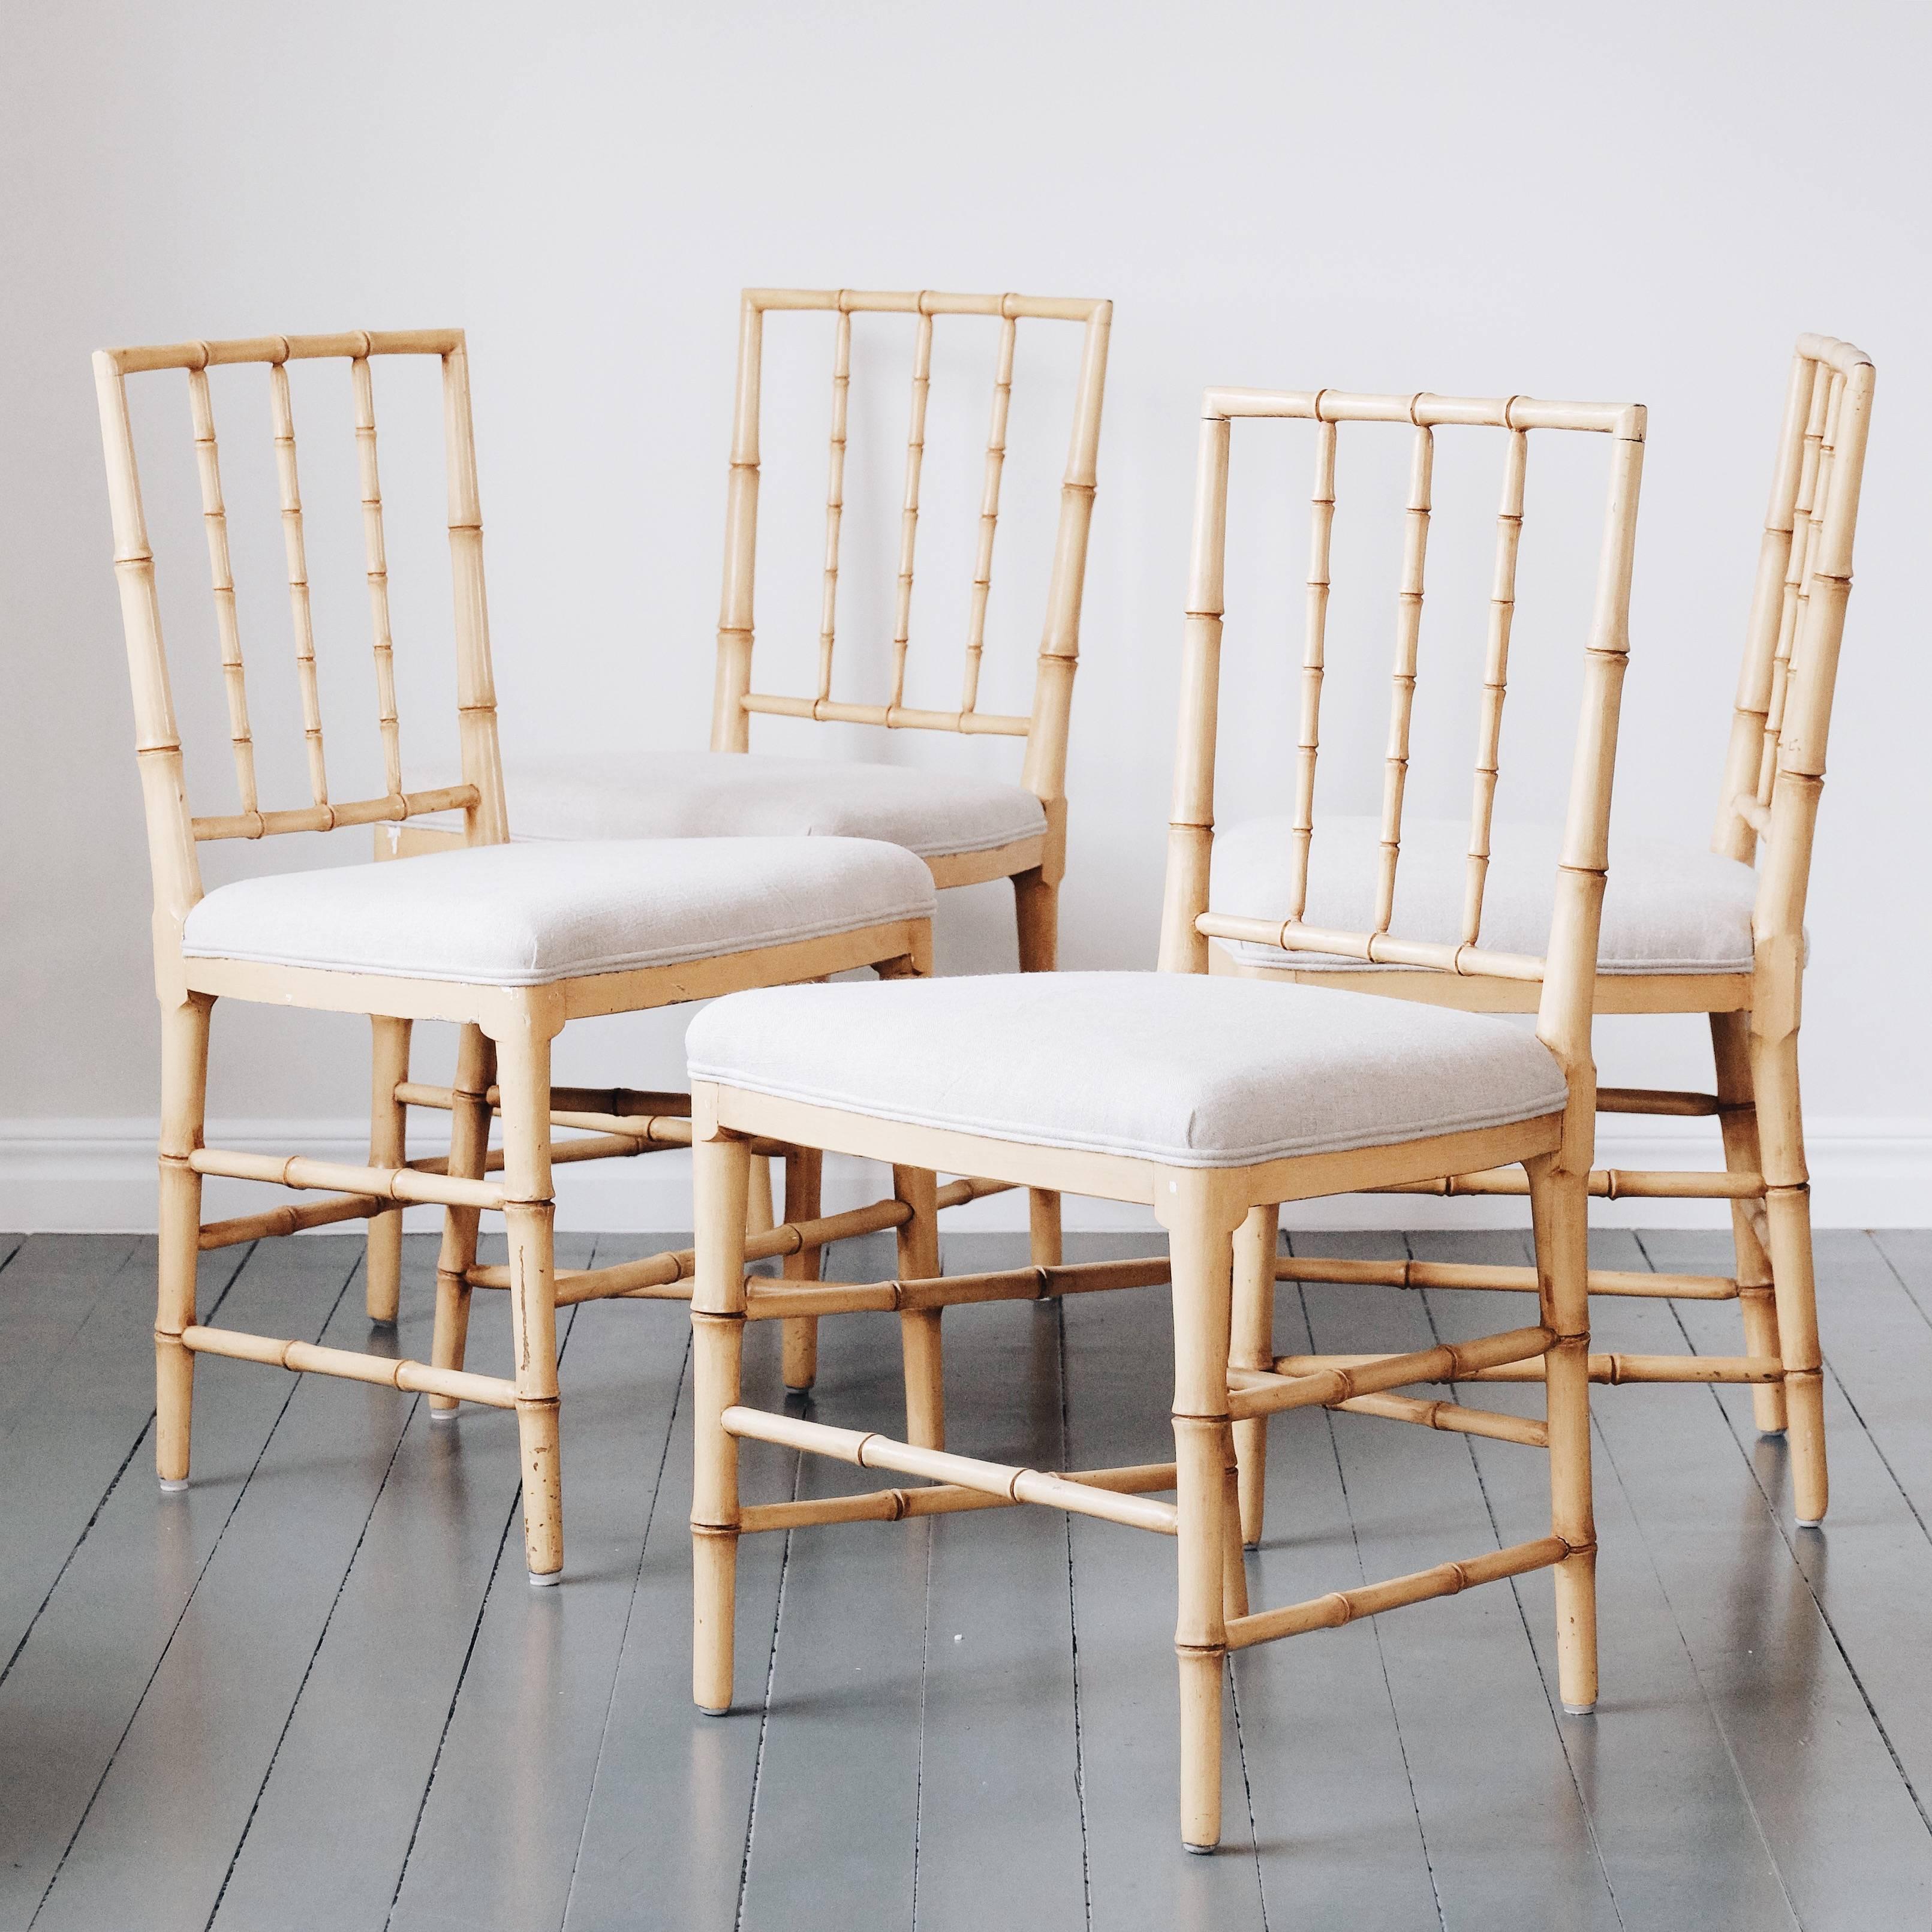 Rare set of four early 19th century Gustavian bamboo imitation dining chairs attributed to Ephraim Stahl. Supplier to the Royal Court and one of the most sophisticated and inventive makers of his period.

Chinese furniture of bamboo became known